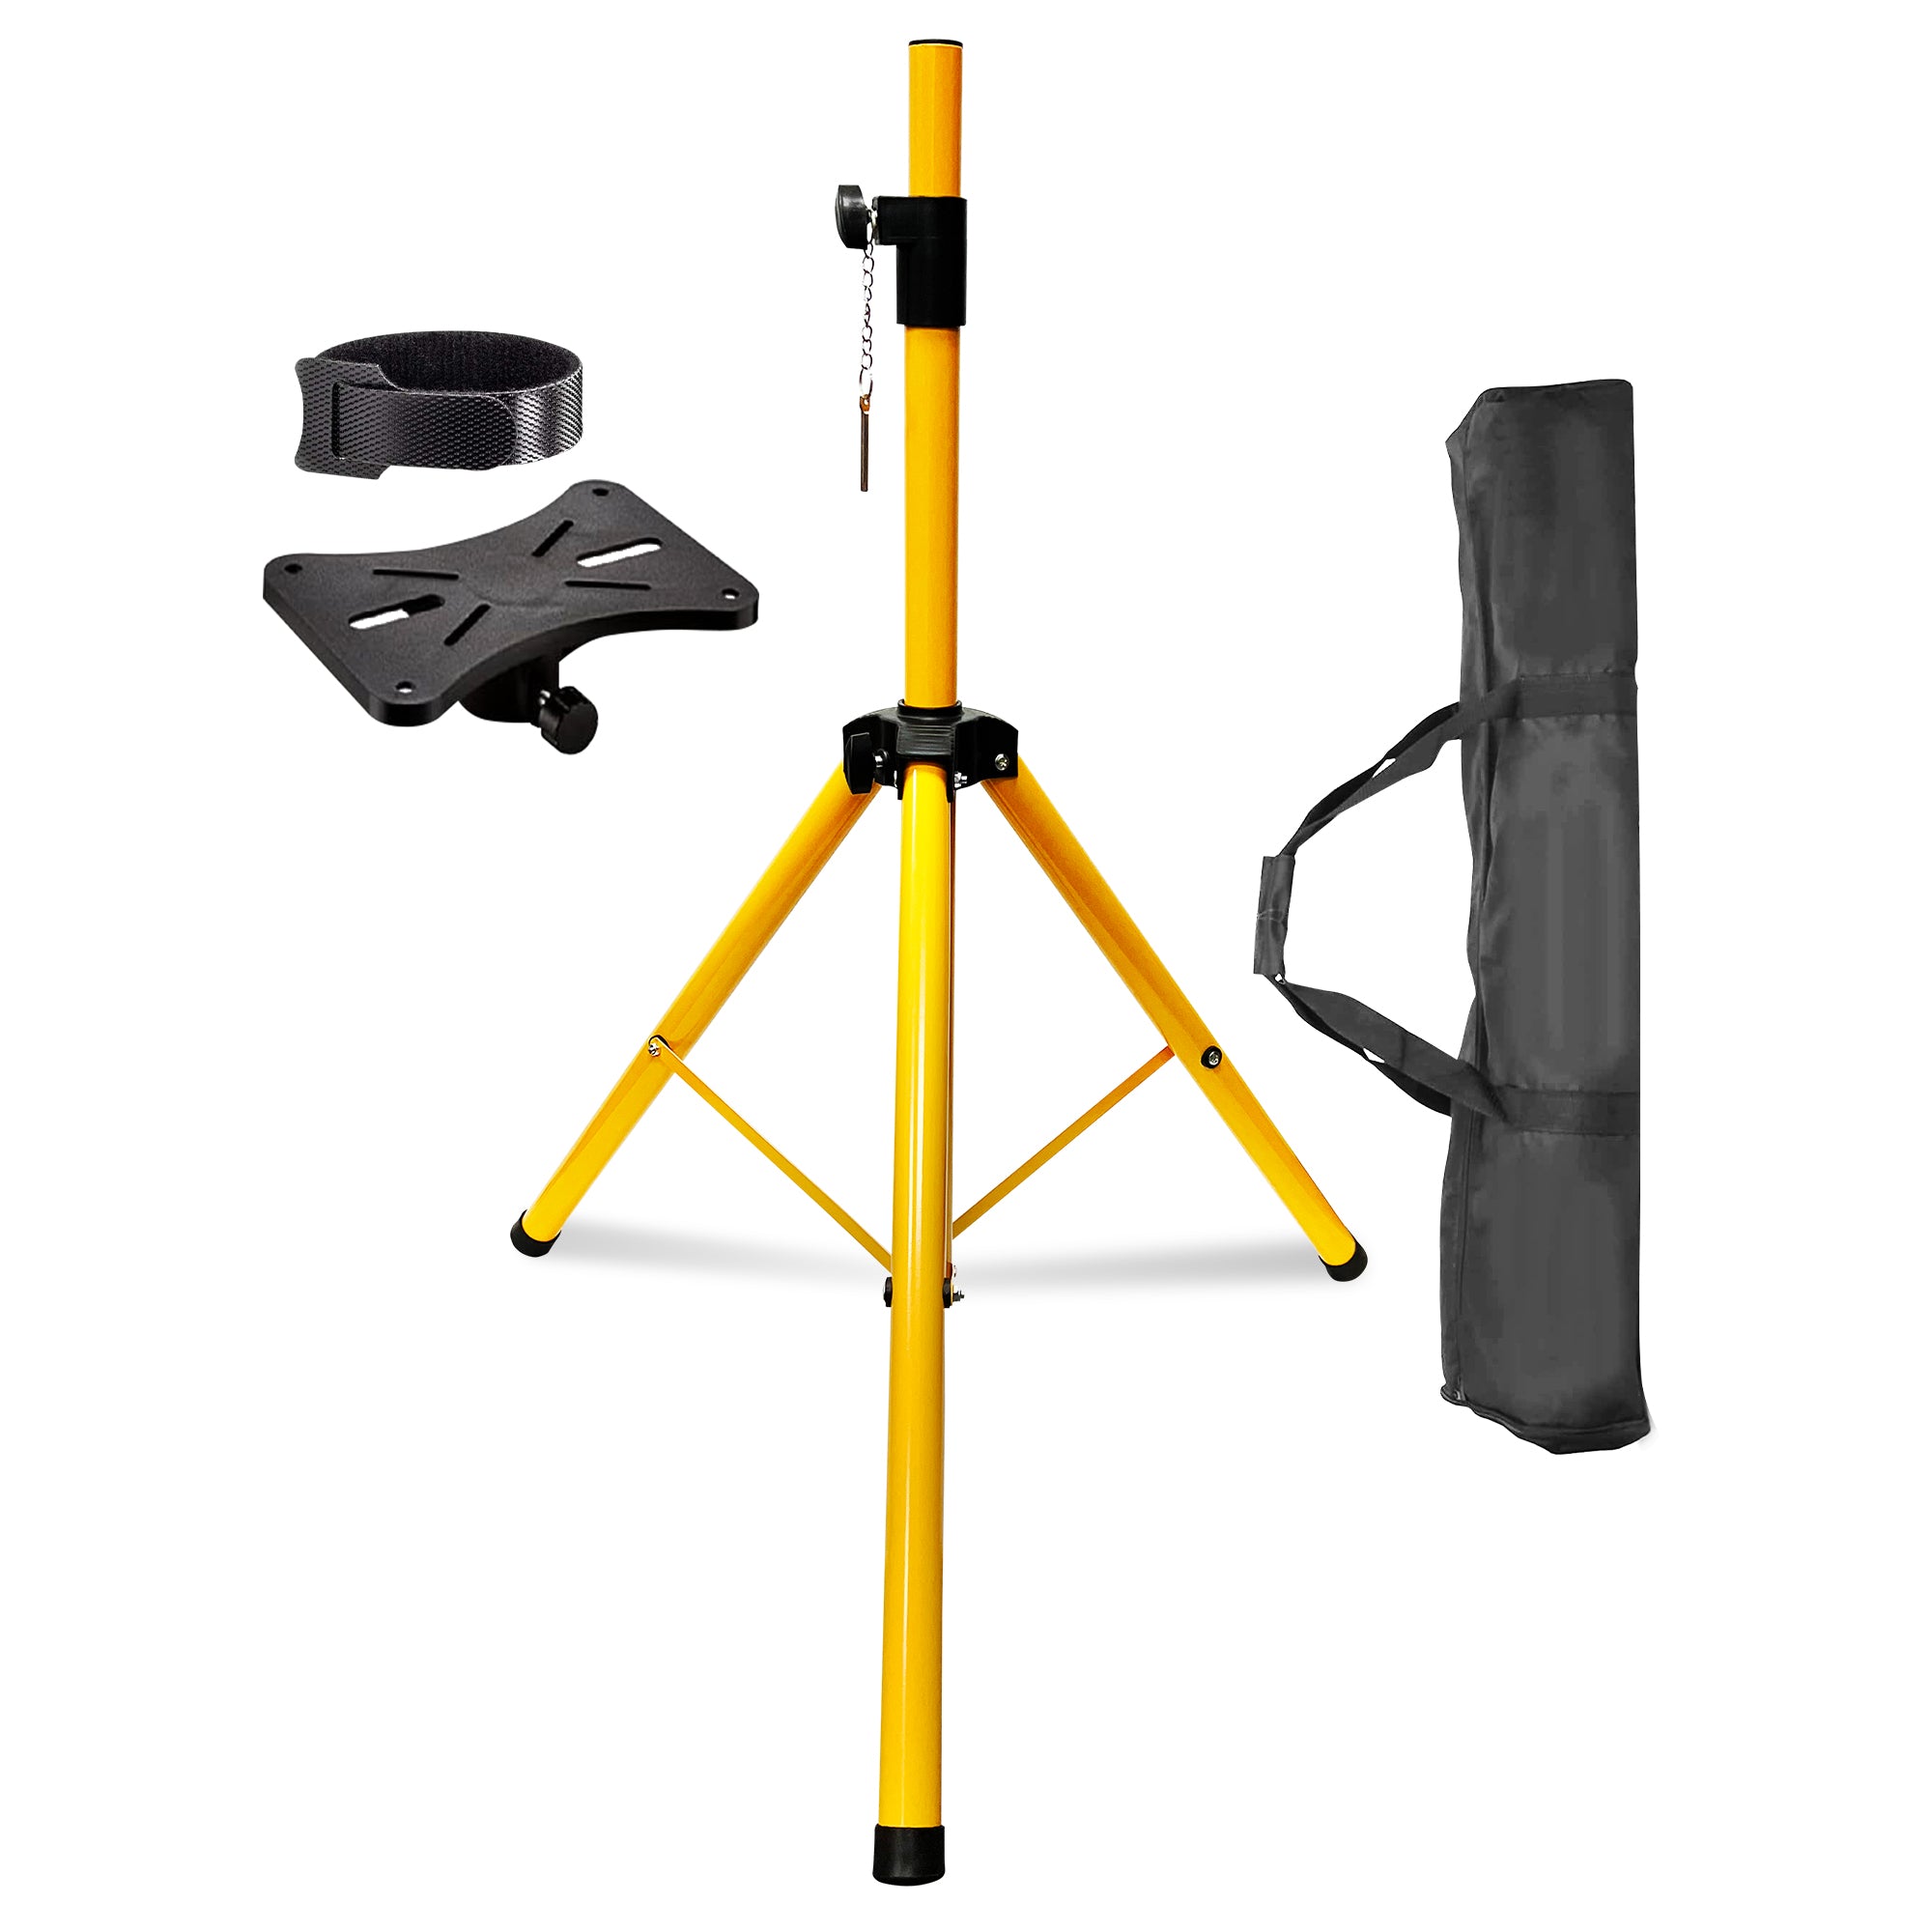 5Core Speaker Stands Tripod Tall DJ Studio Monitor stands 72" Pole Mount Yellow with Bag